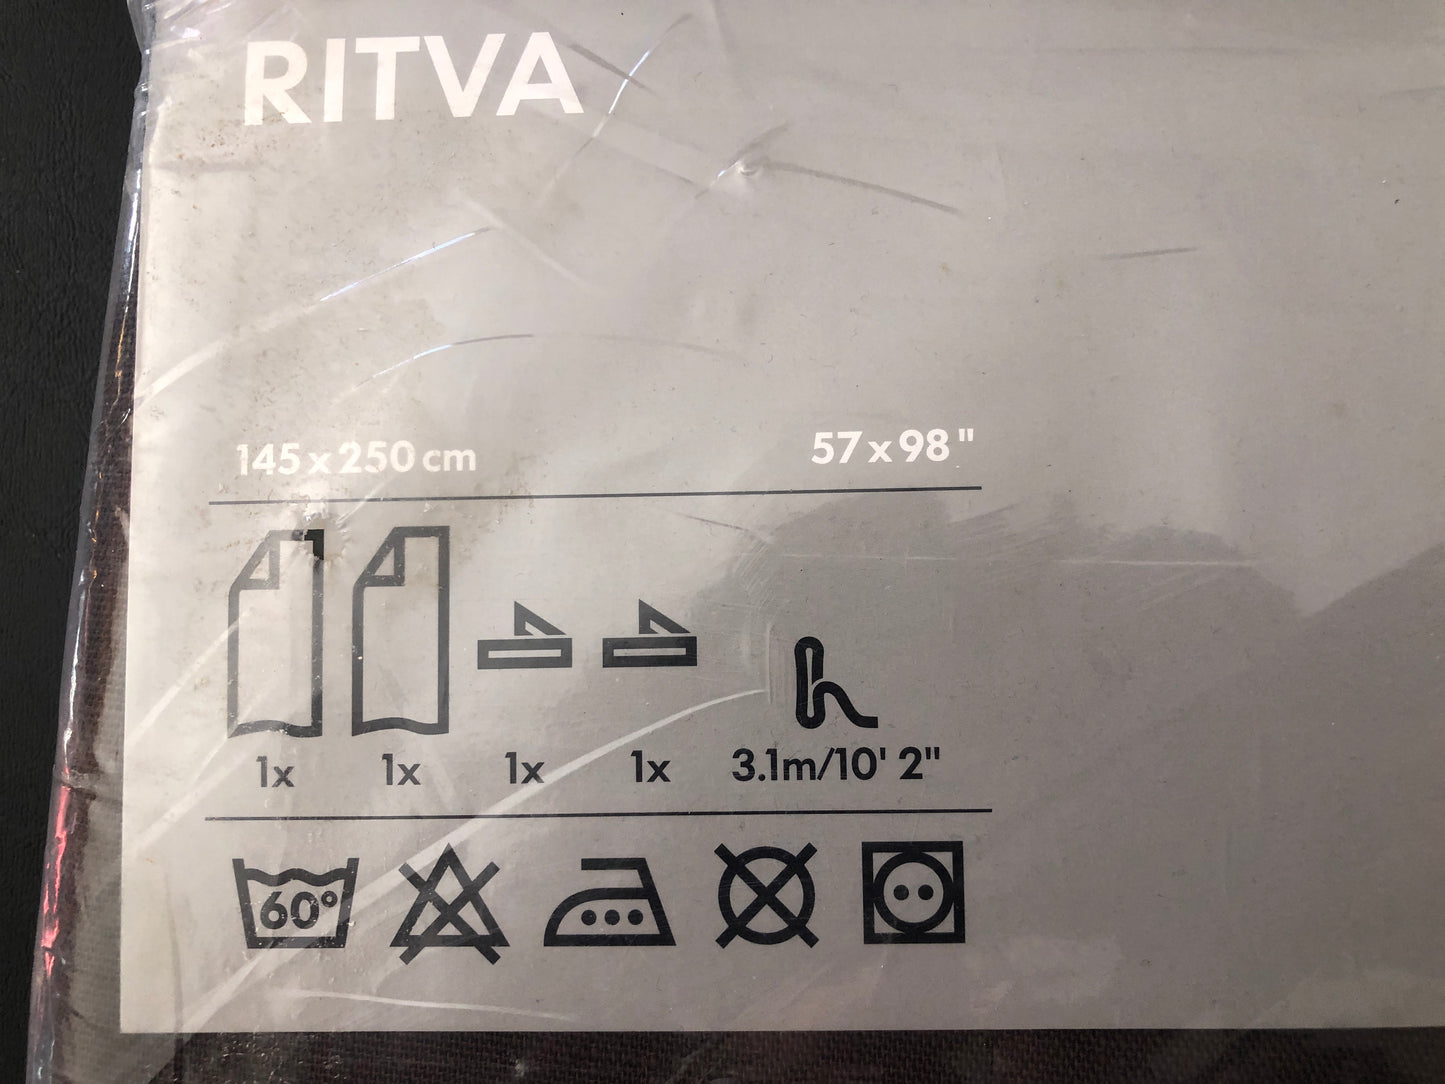 IKEA Ritva Curtains Brown New In Package 57" x 98"